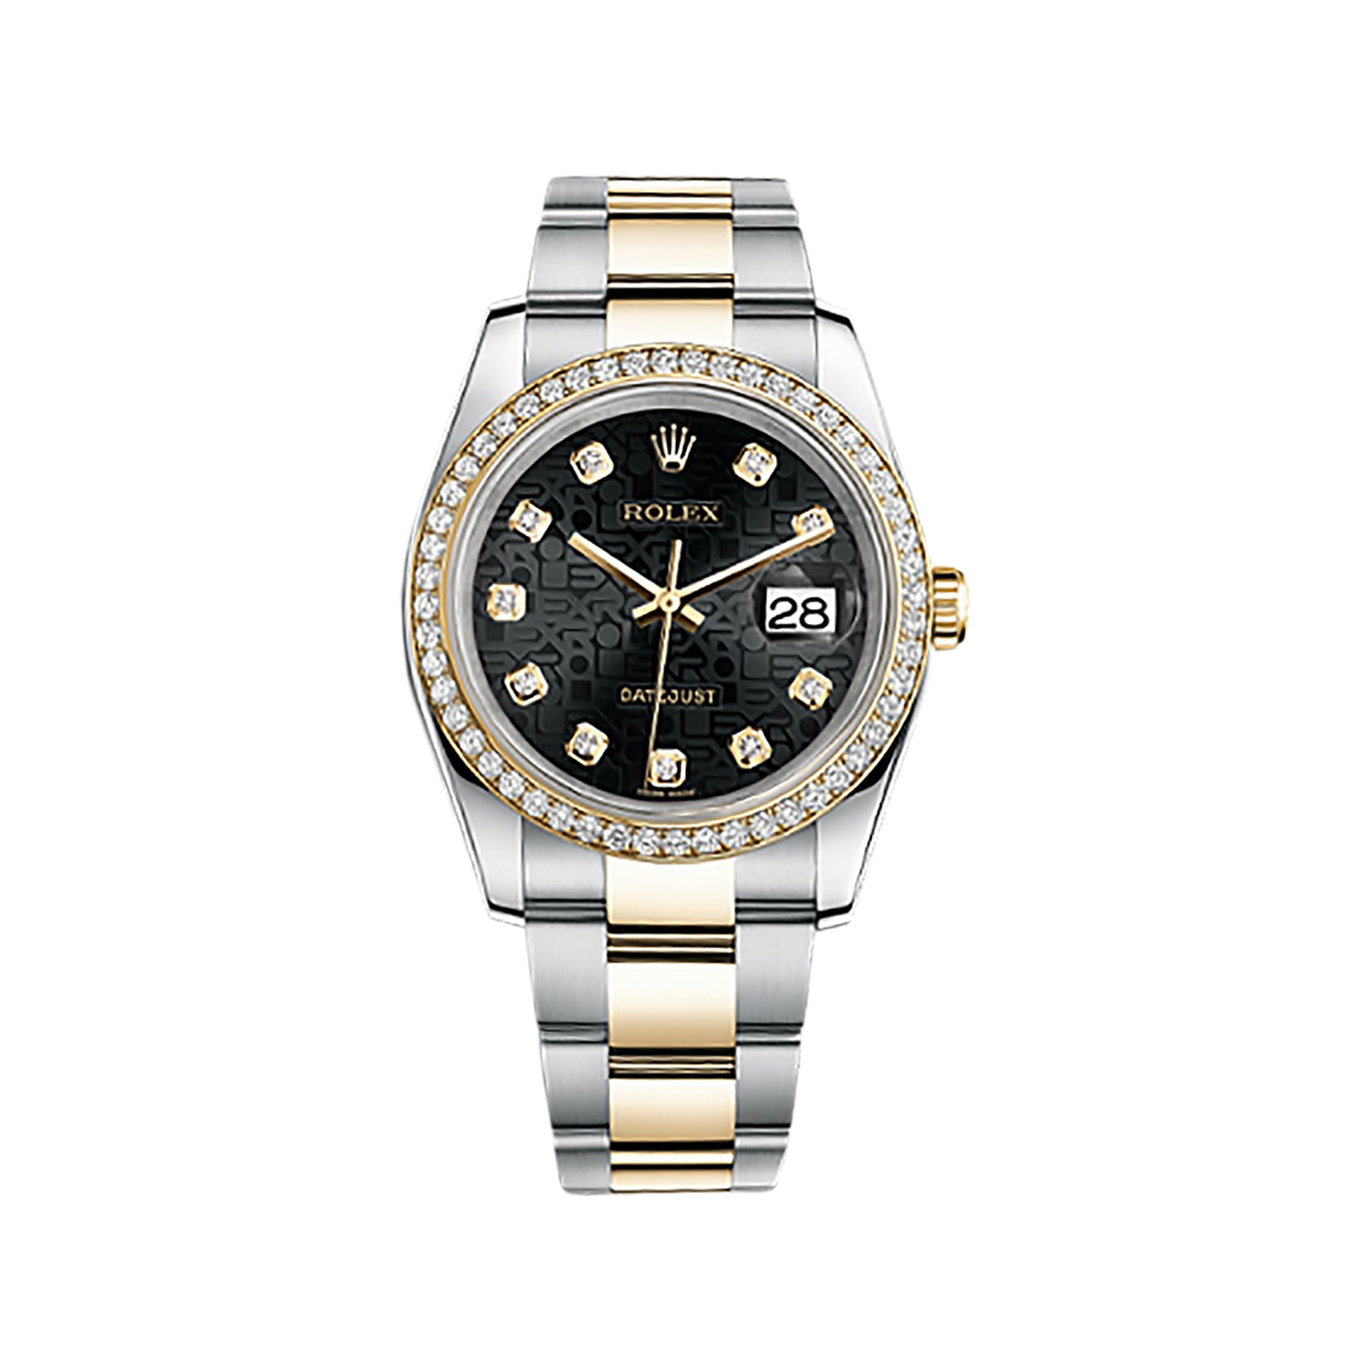 Datejust 36 116243 Gold & Stainless Steel Watch (Black Jubilee Design Set with Diamonds)